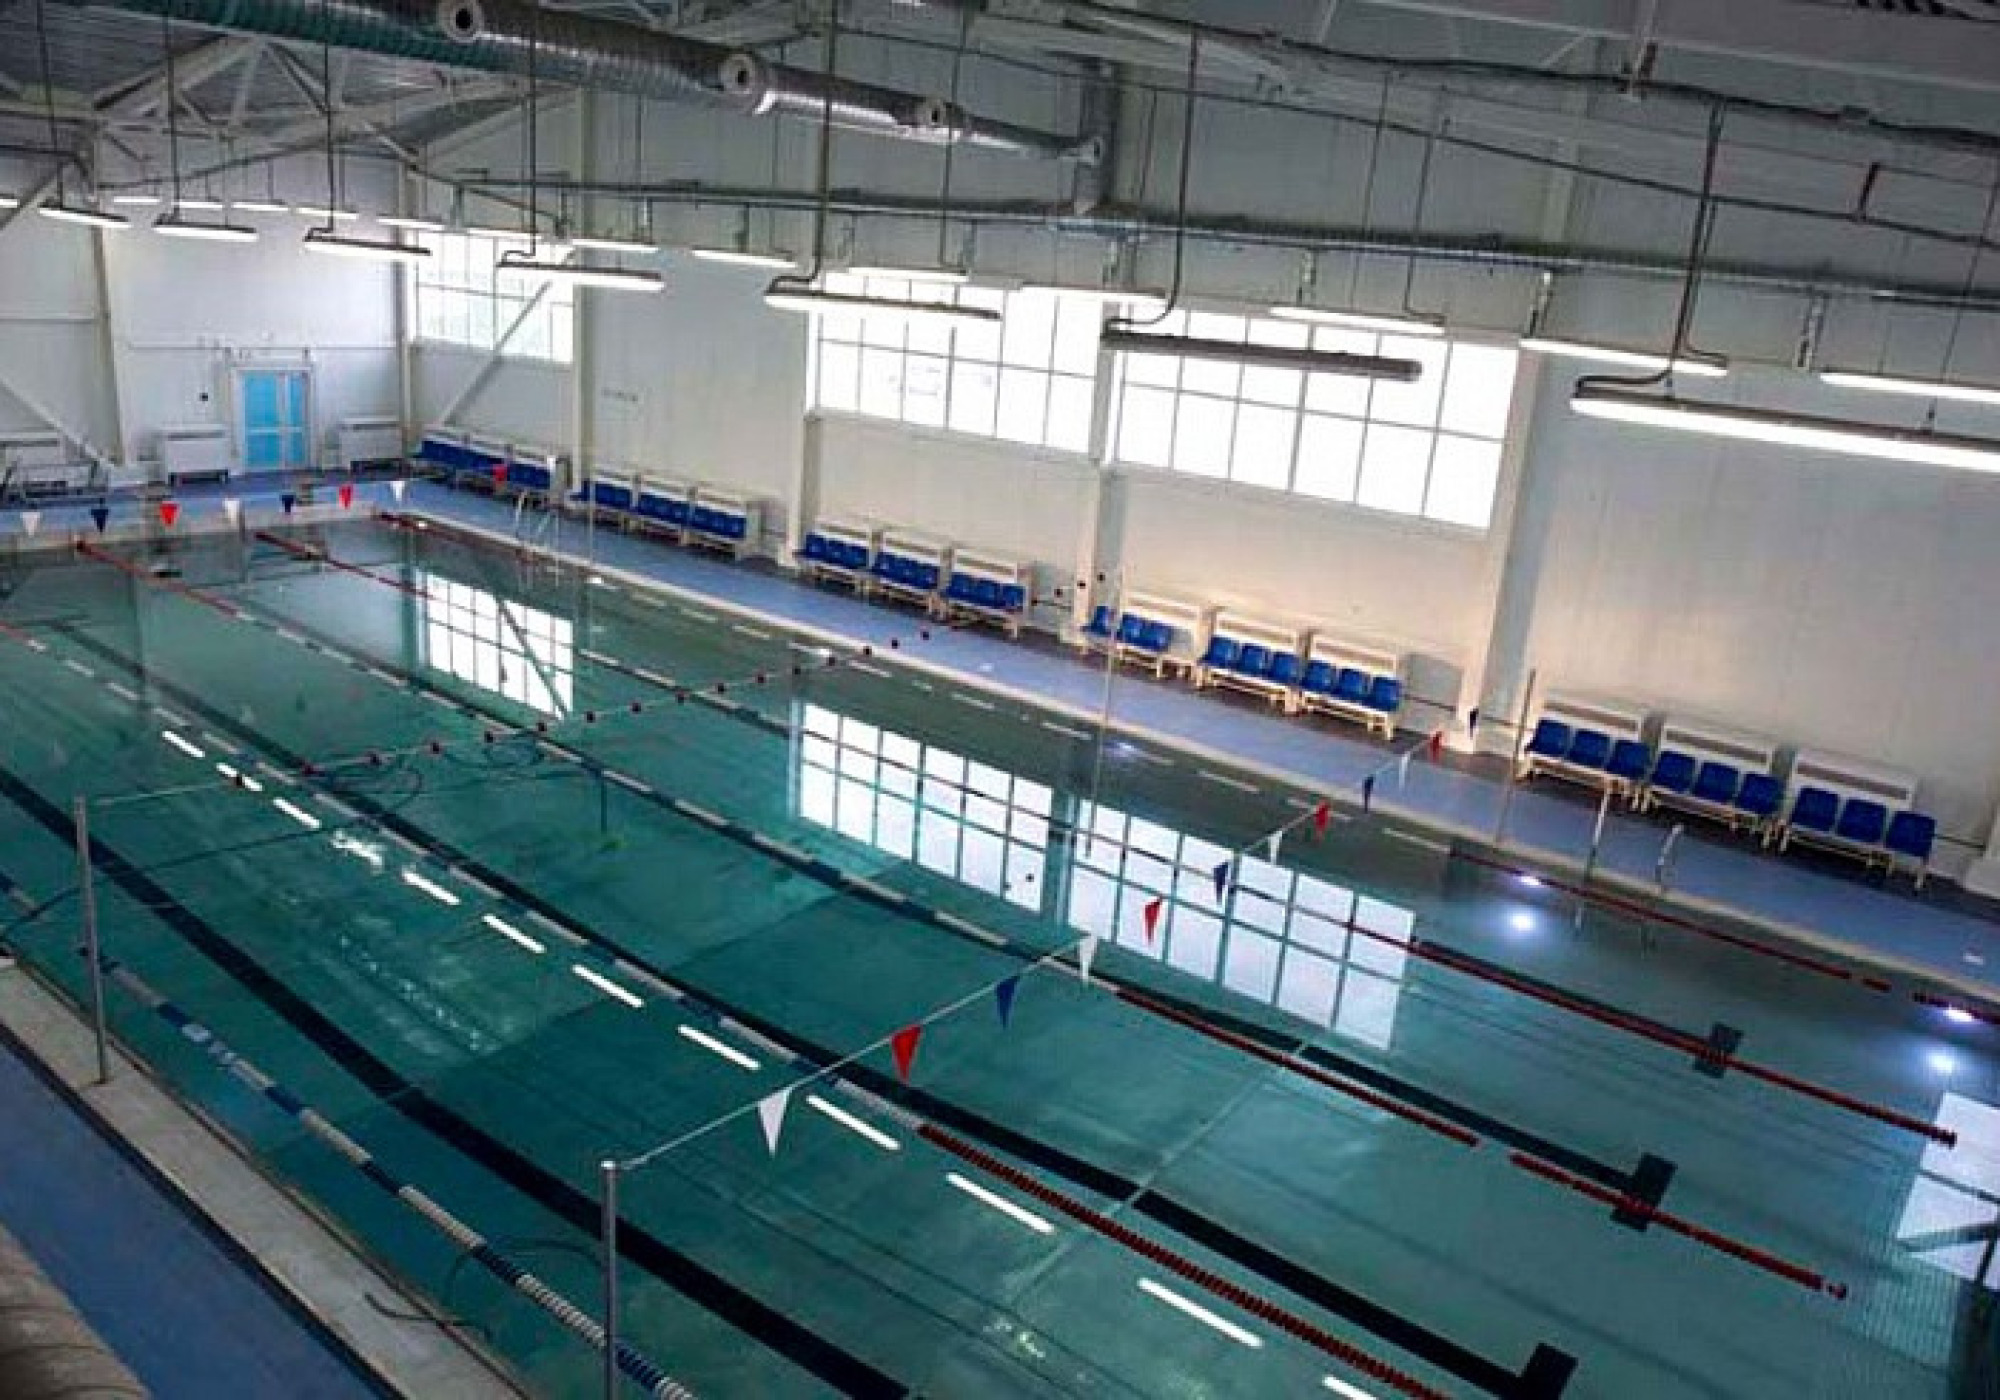 The 25-meter pool of stainless, built by the company "AQUASECTOR" in Abakan